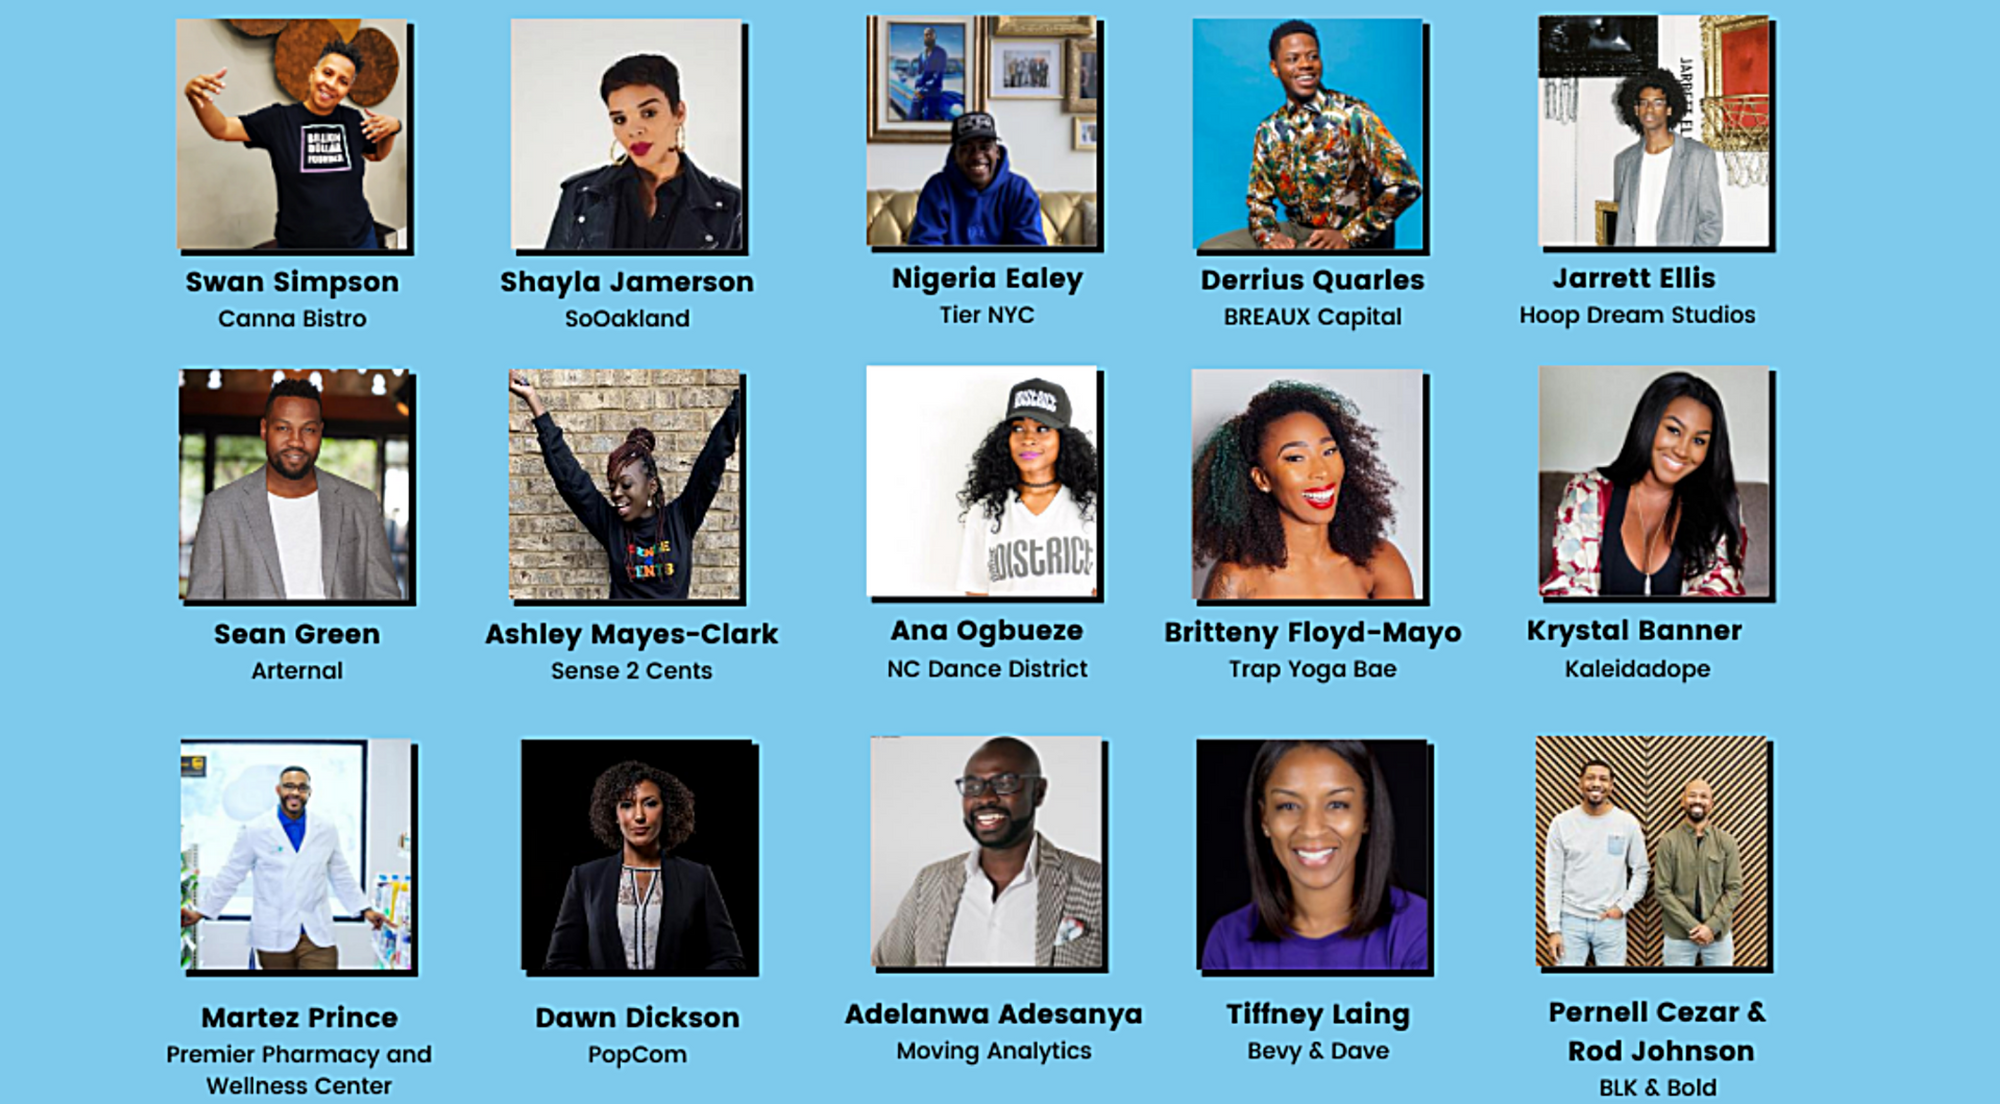 Meet The Winners of The Inaugural OBWS Black Entrepreneur of the Year Awards